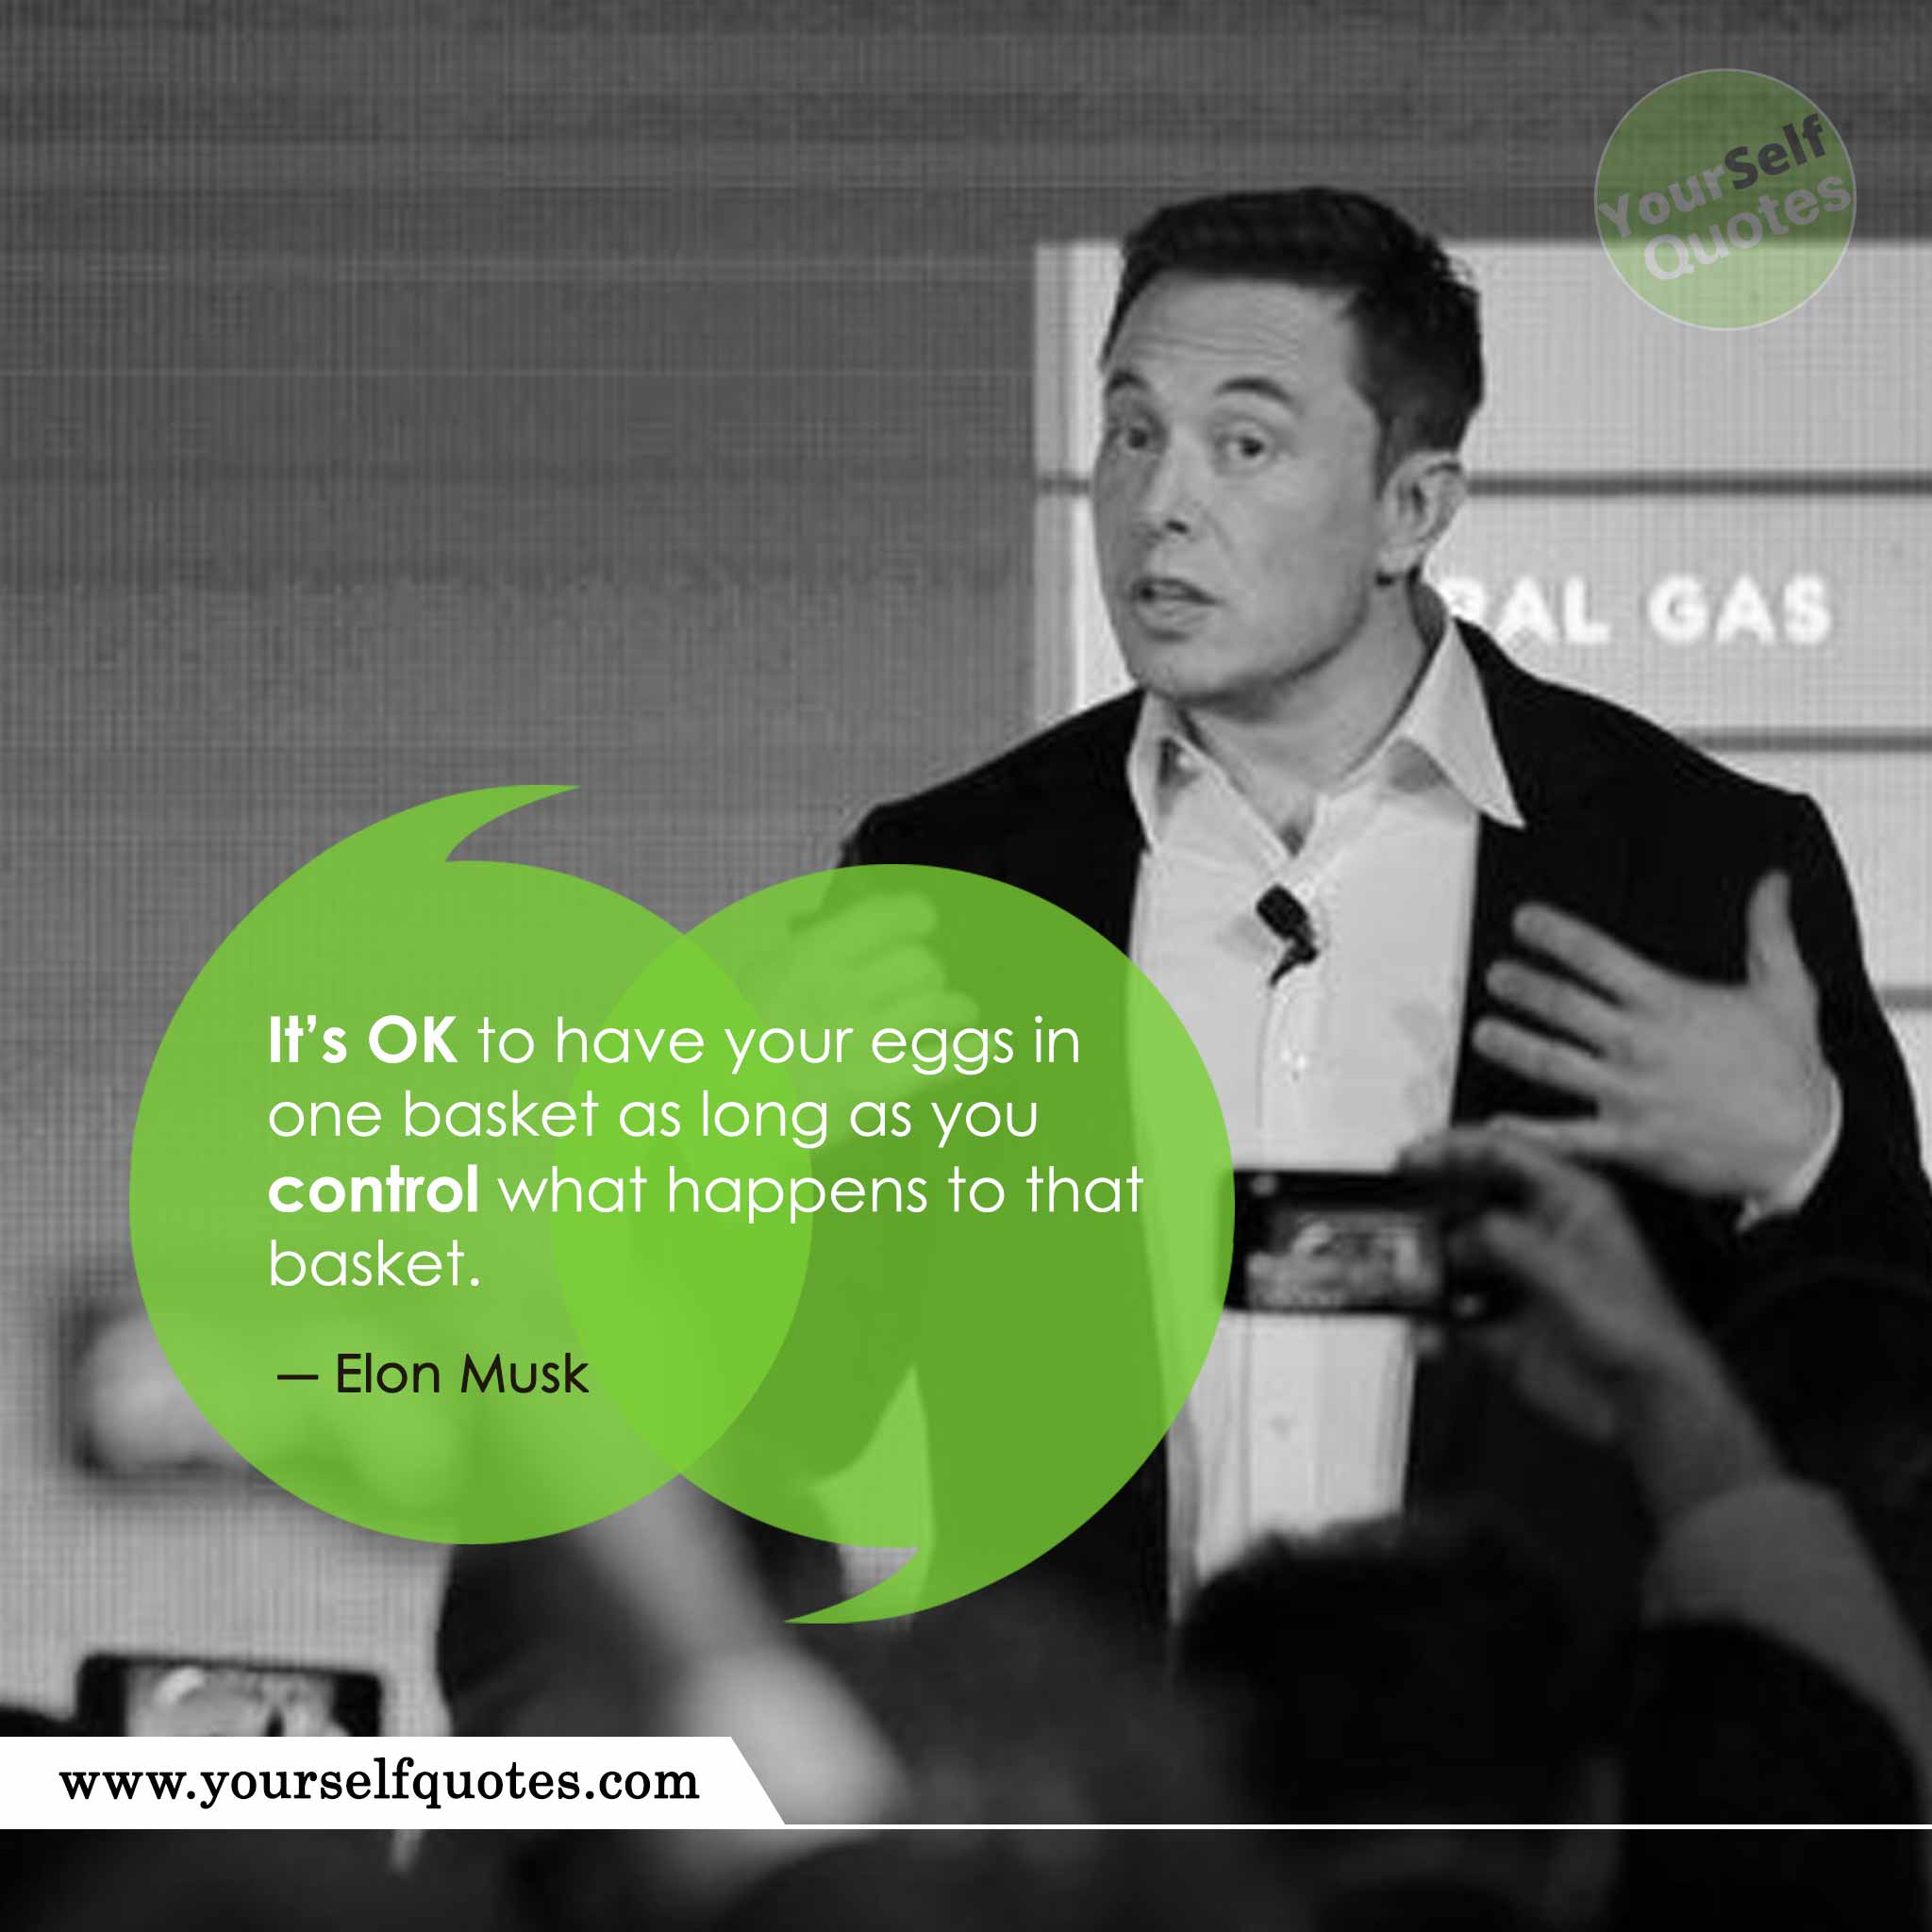 Elon Musk Quotes To Inspire